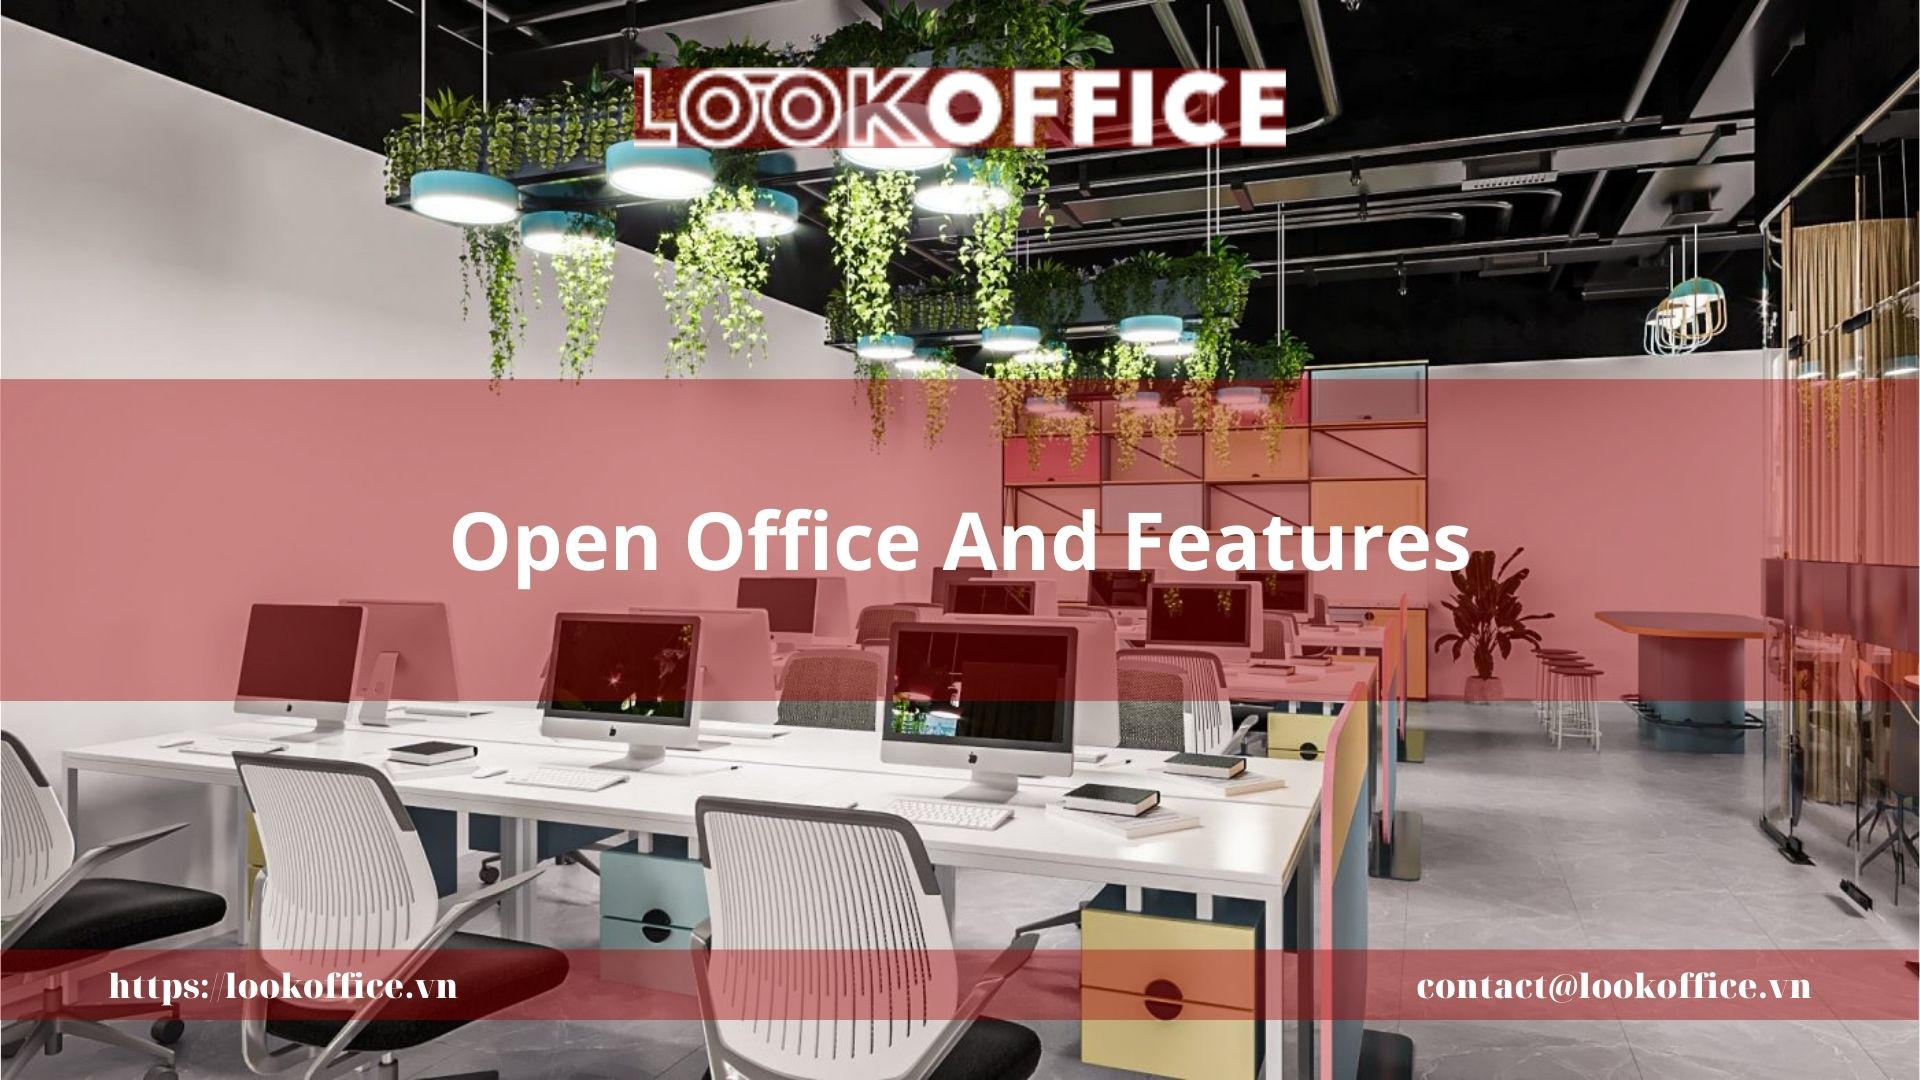 Open Office And Features